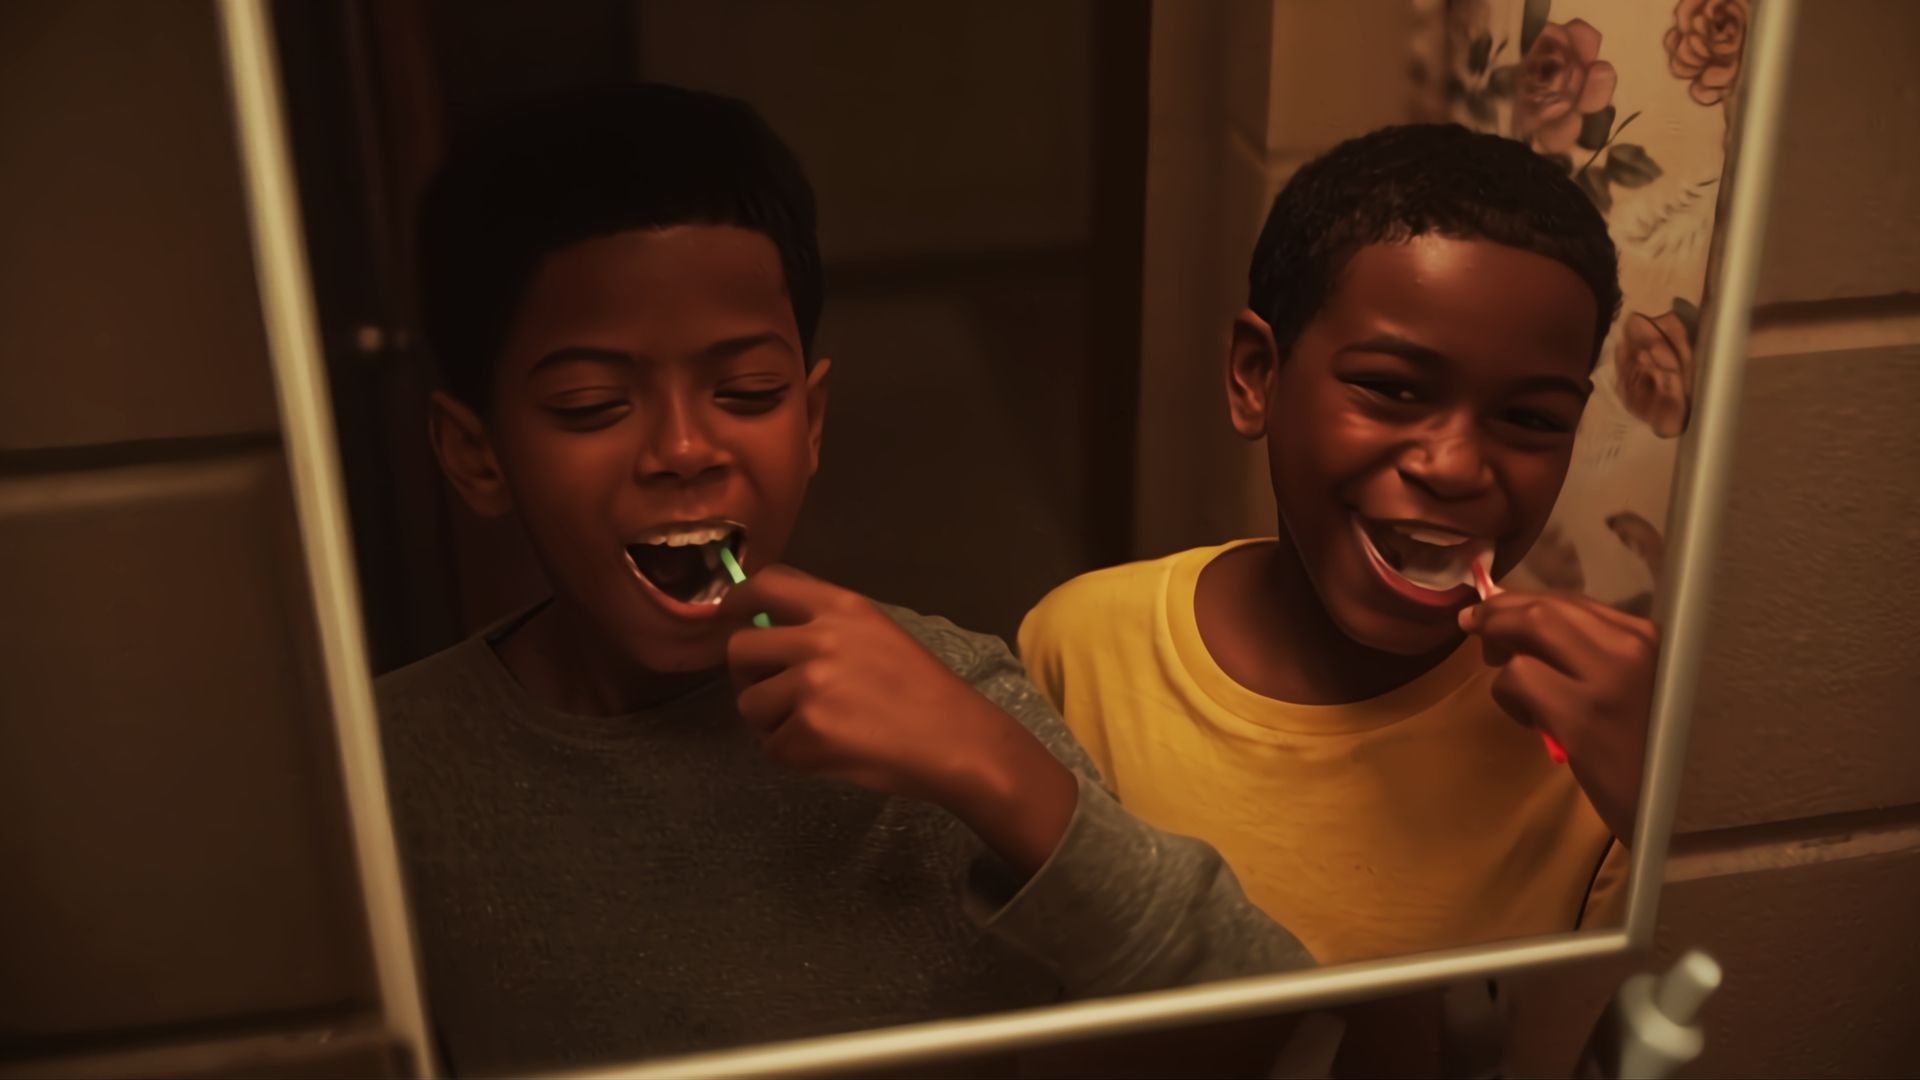 The two young boys brush their teeth in the movie We Grown Now